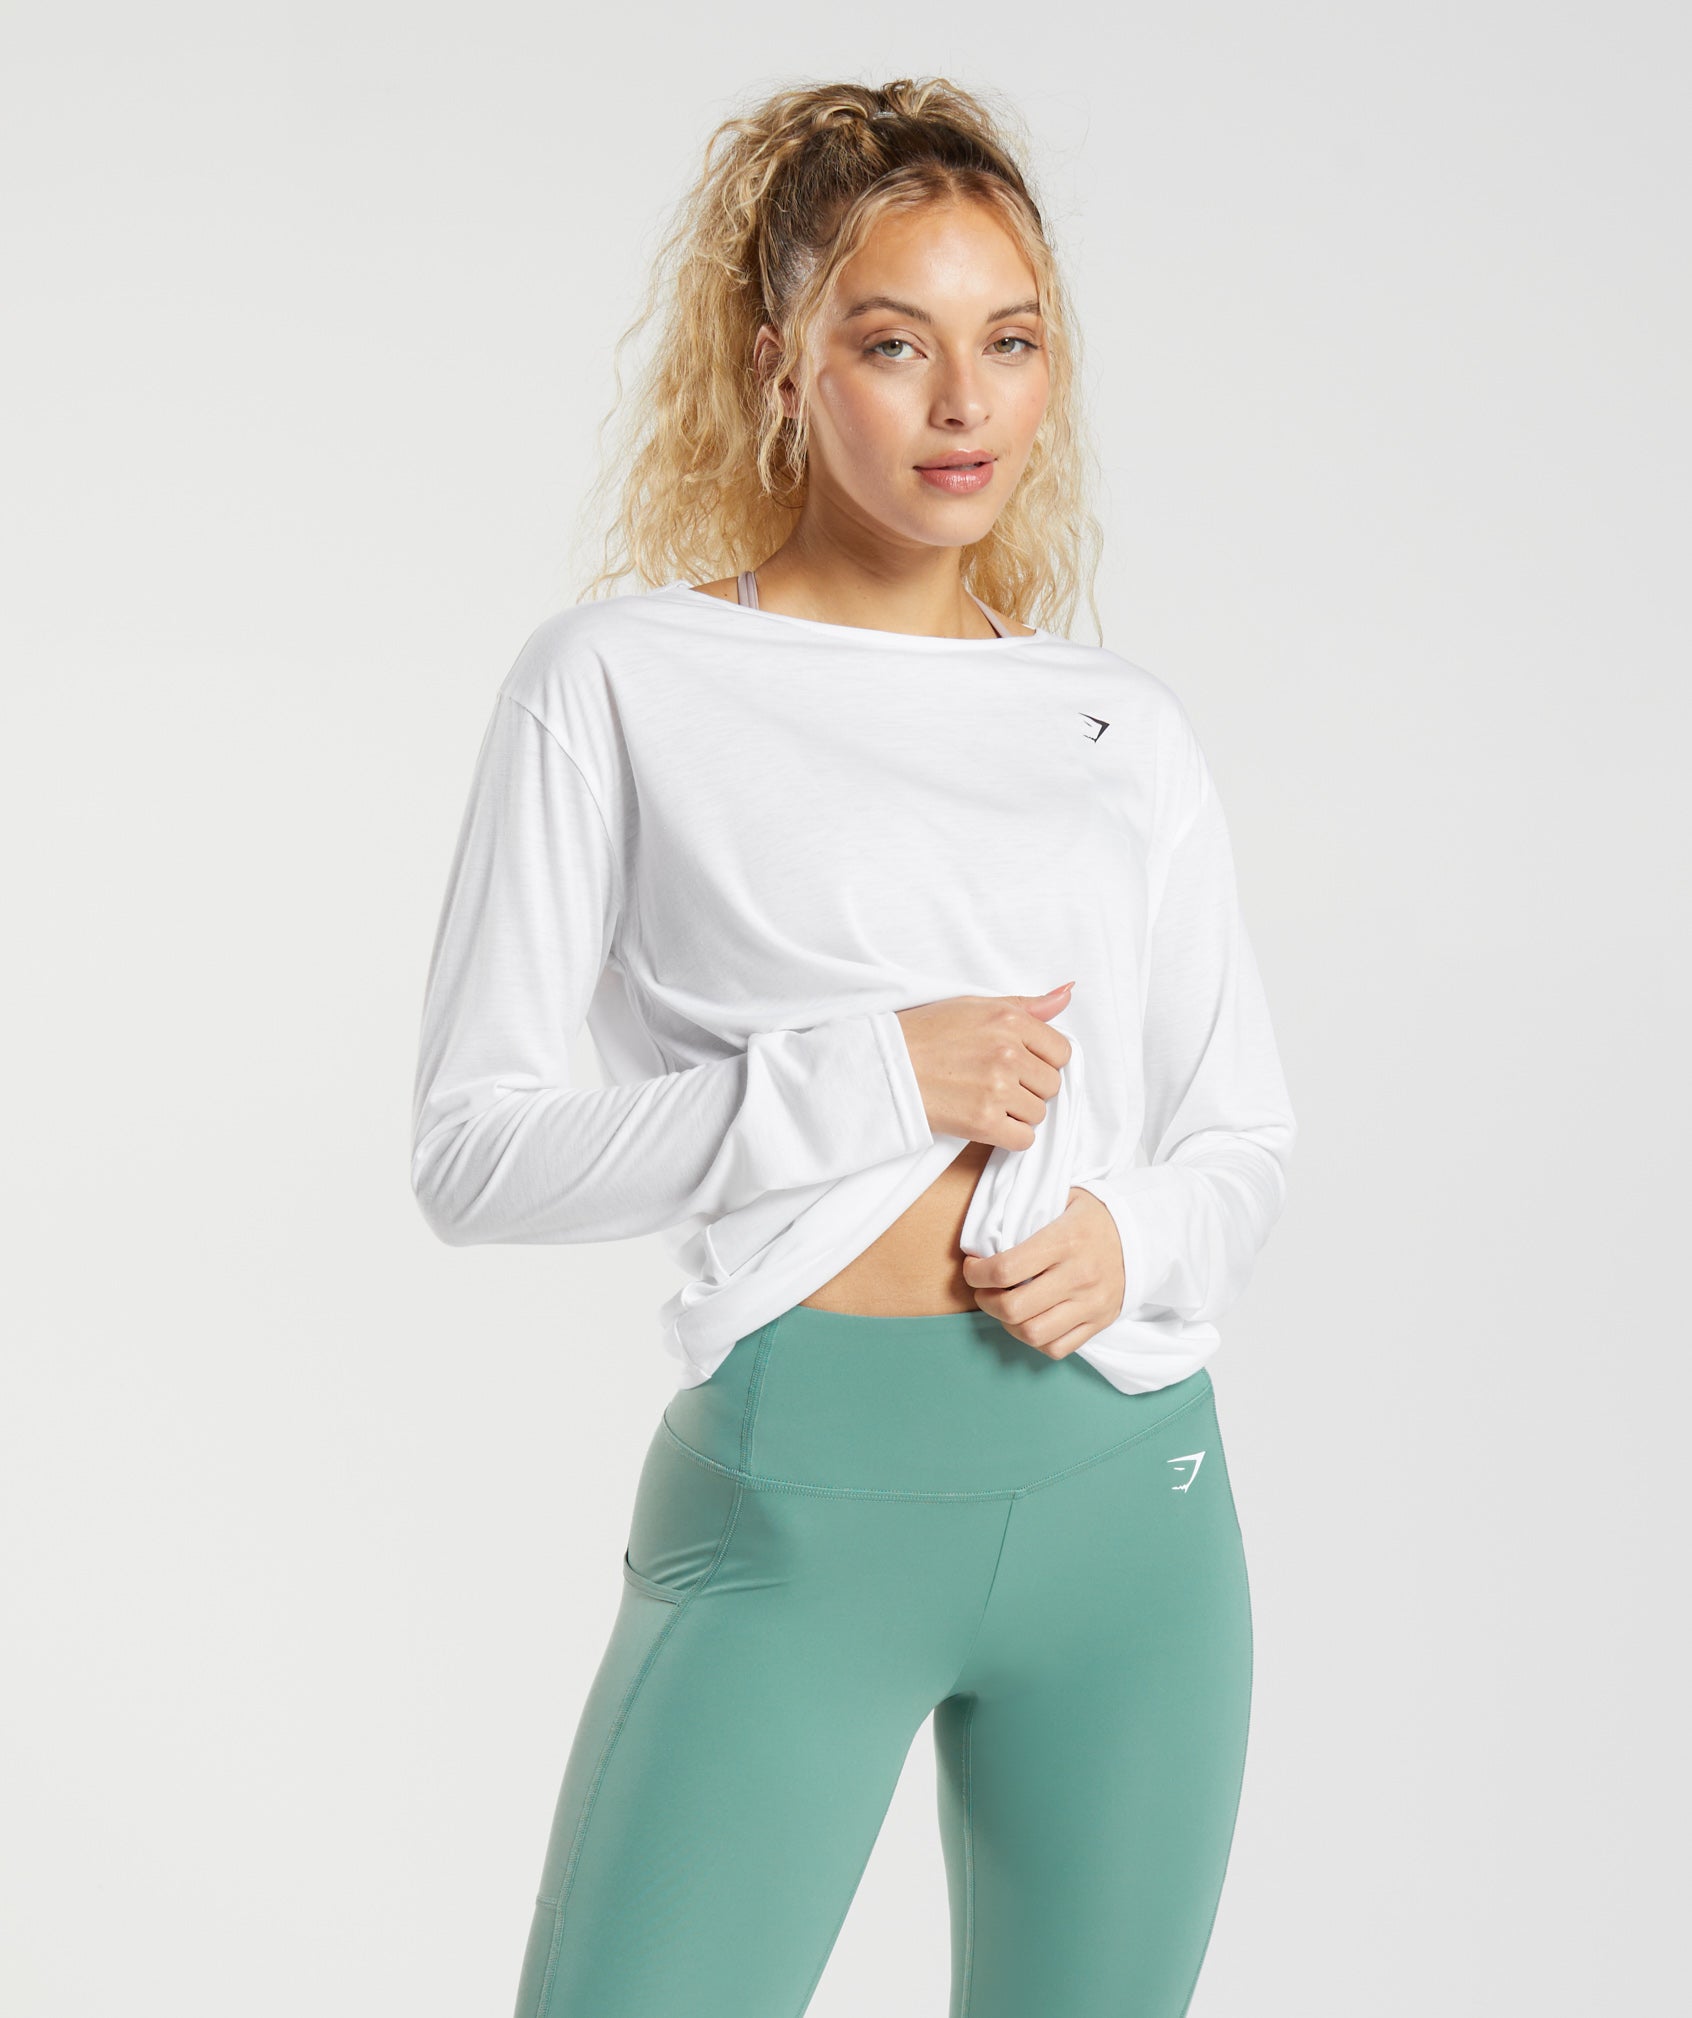 Gymshark Super Soft Cut-Out Long Sleeve Top - White